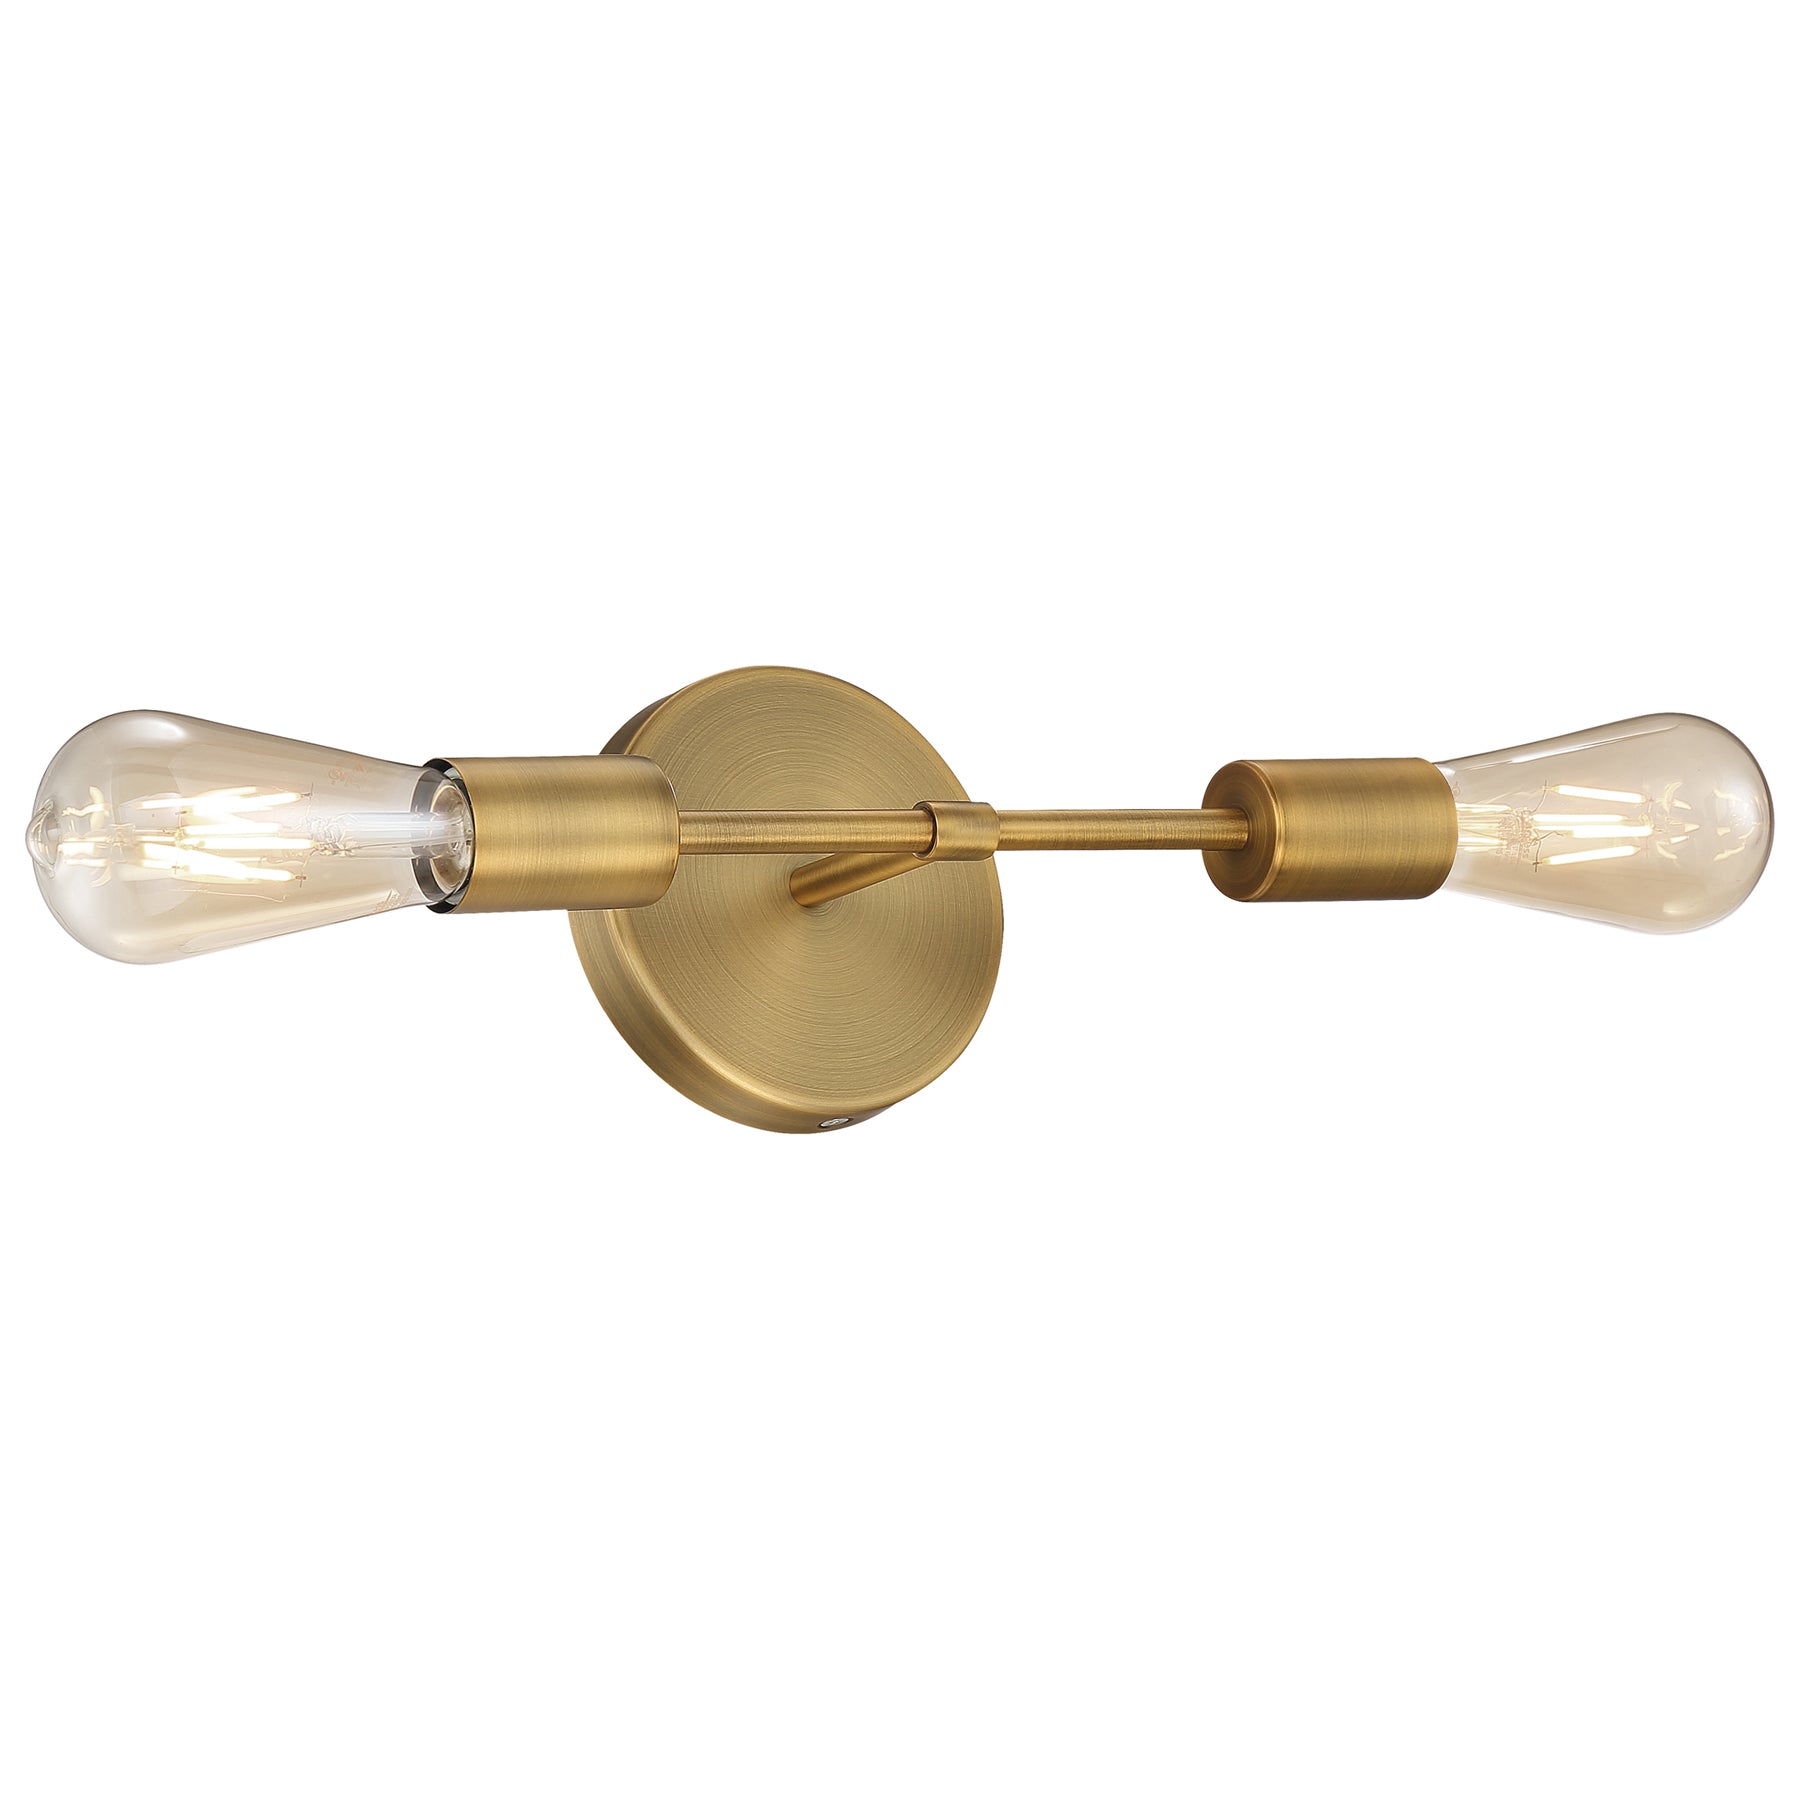  View details for Iconic 2 Light 5in. Wall Sconce (Antique Brushed Brass) Iconic 2 Light 5in. Wall Sconce (Antique Brushed Brass)